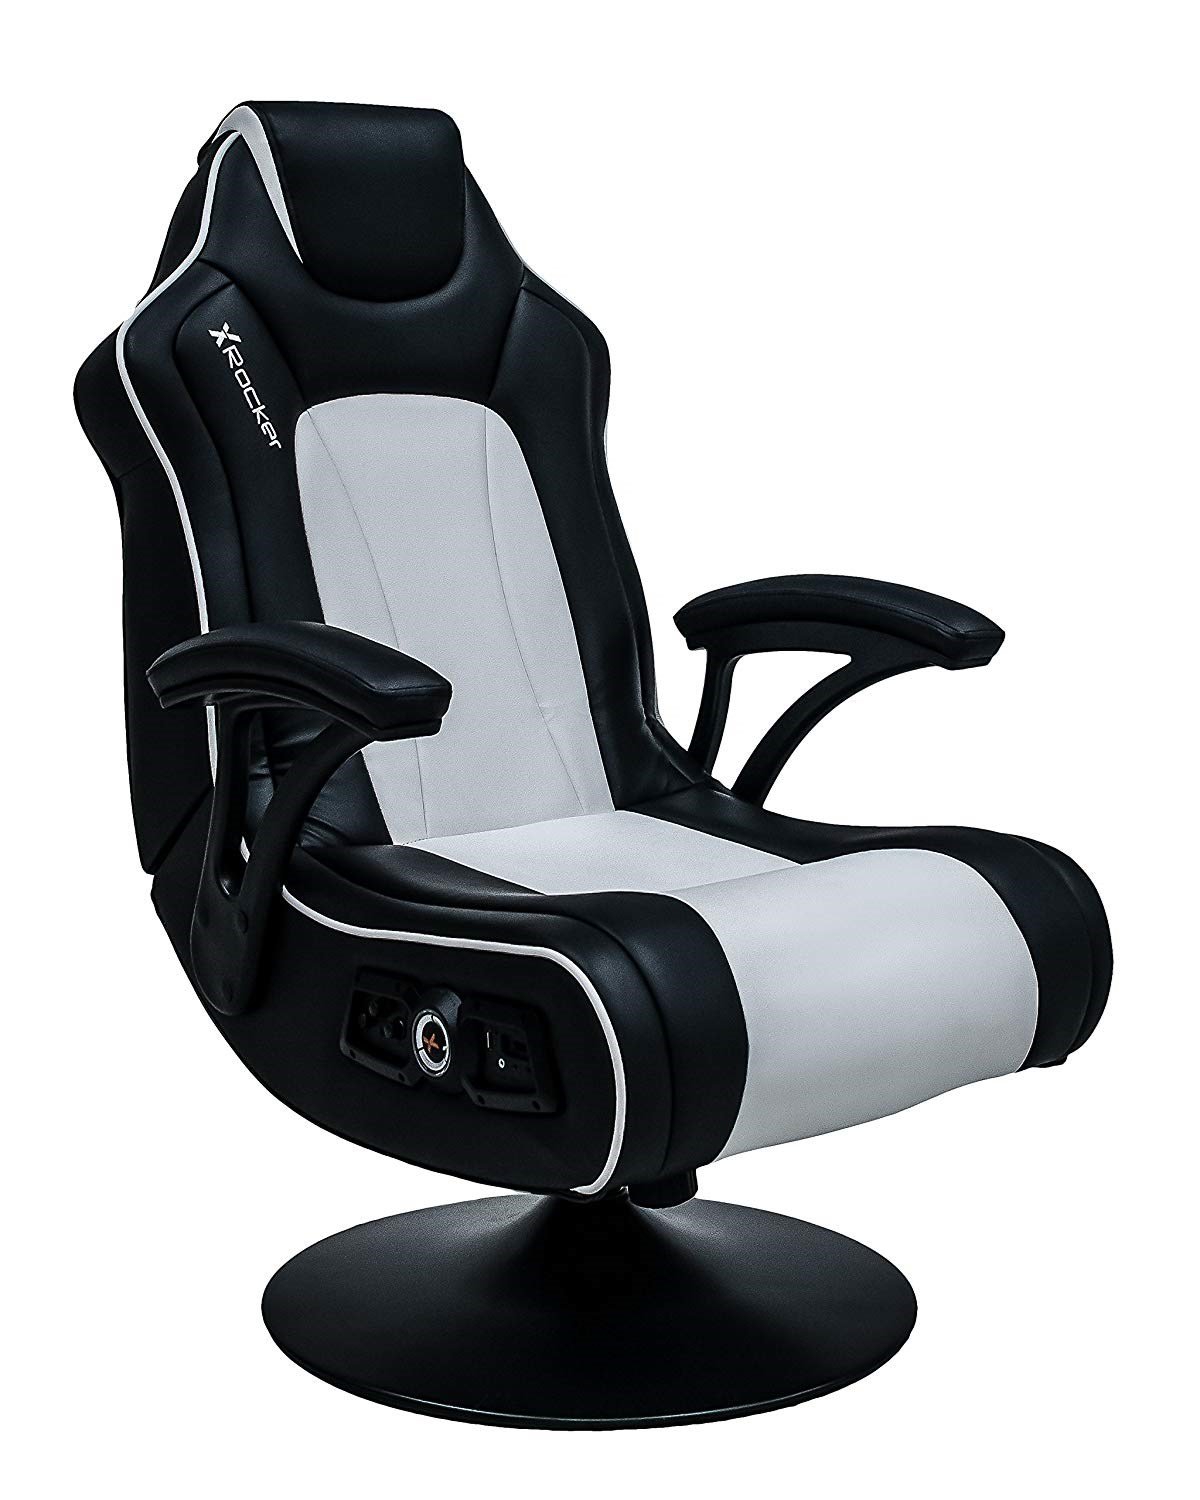 X Rocker Torque 2.1 Gaming Chair with Bluetooth Speakers